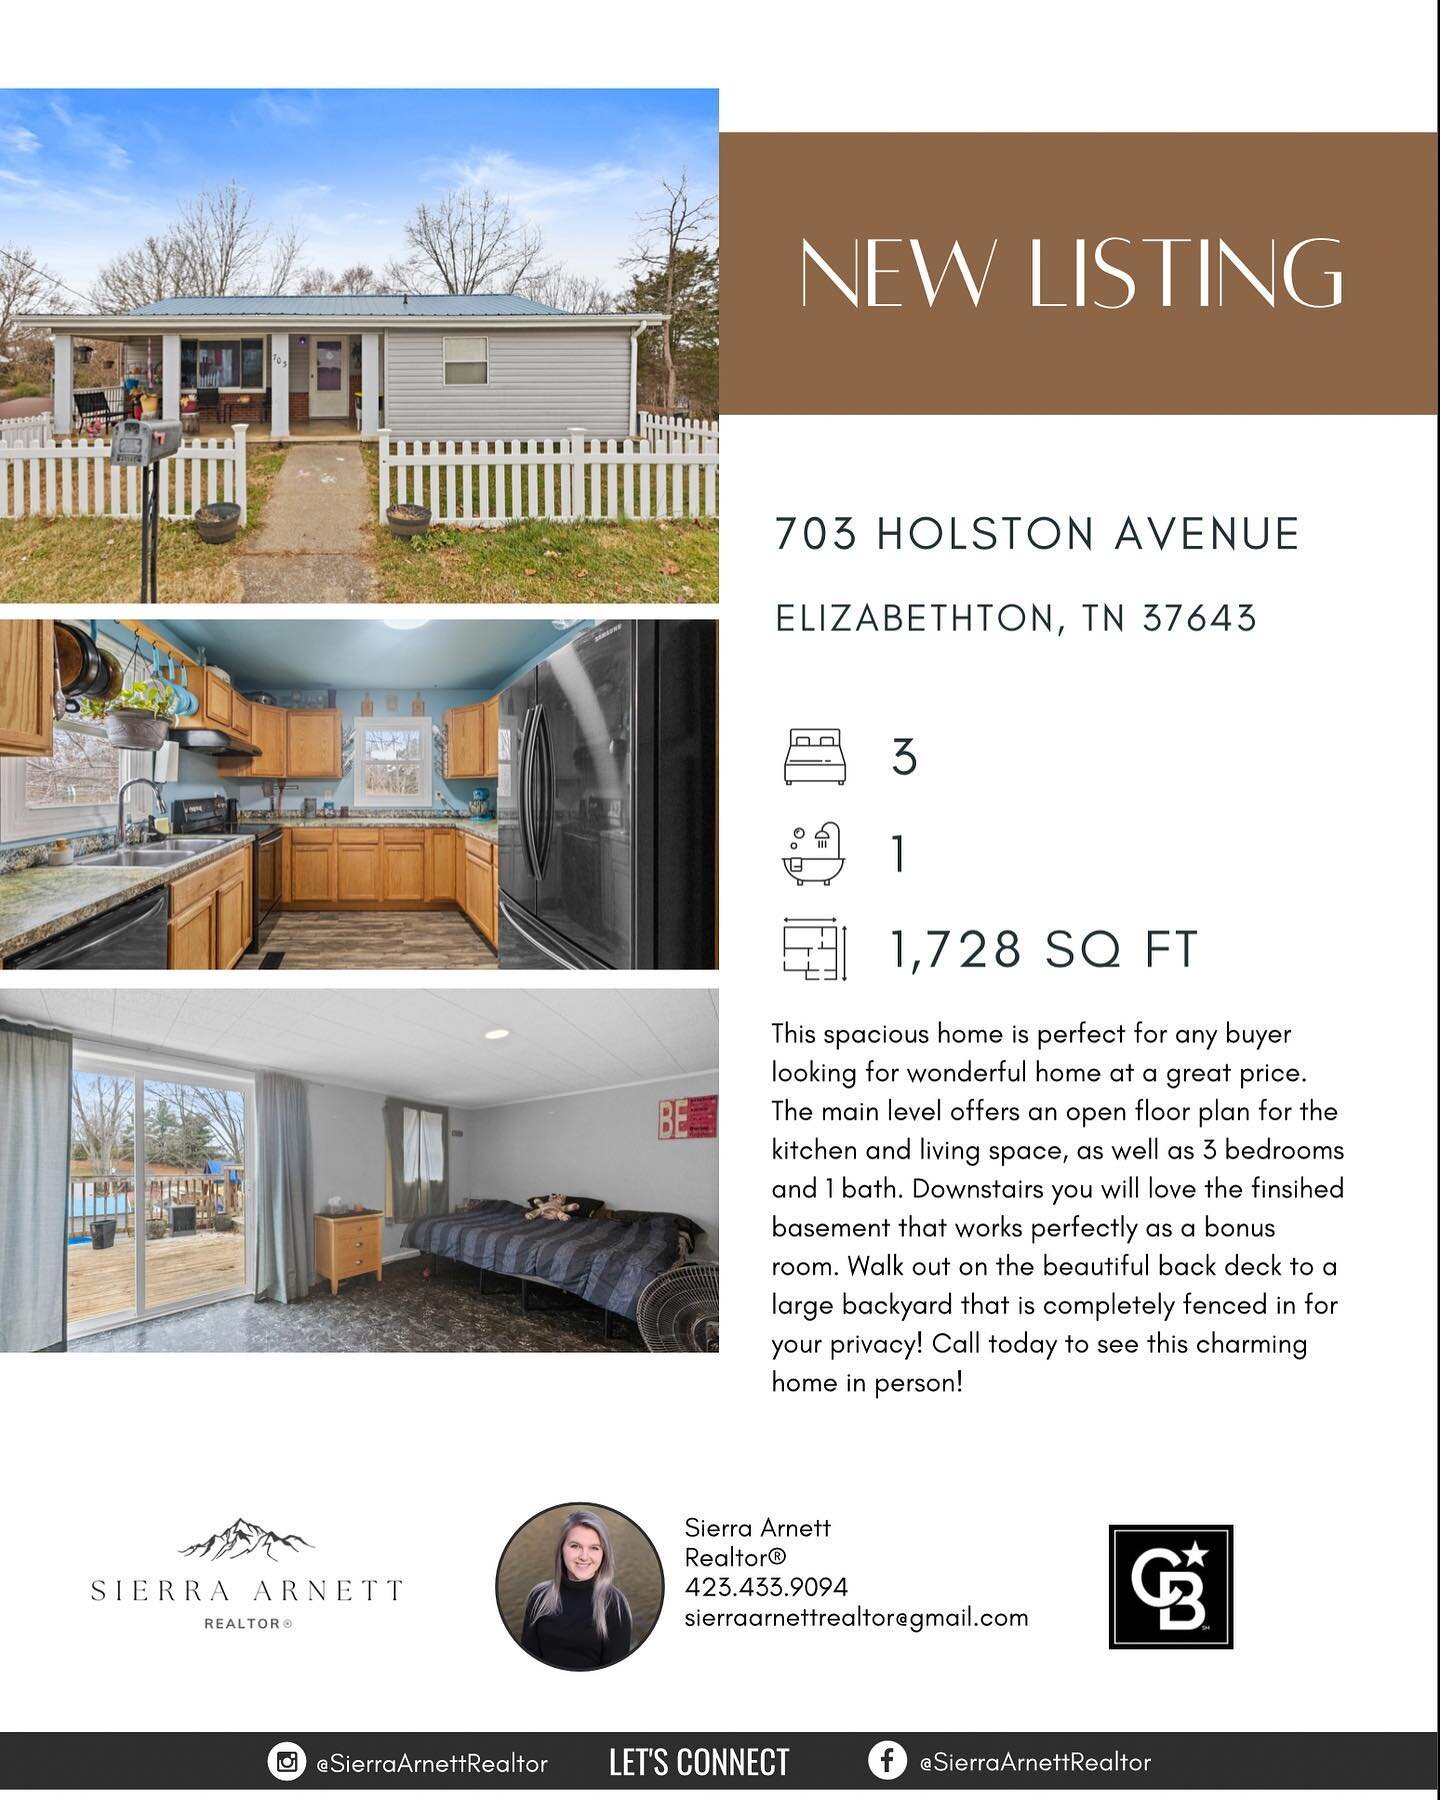 &bull;&bull;&bull;New Listing&bull;&bull;&bull;

703 Holston Avenue
Elizabethton, TN 37643
$118,000

This spacious home is perfect for any buyer looking for wonderful home at a great price. The main level offers an open floor plan for the kitchen and